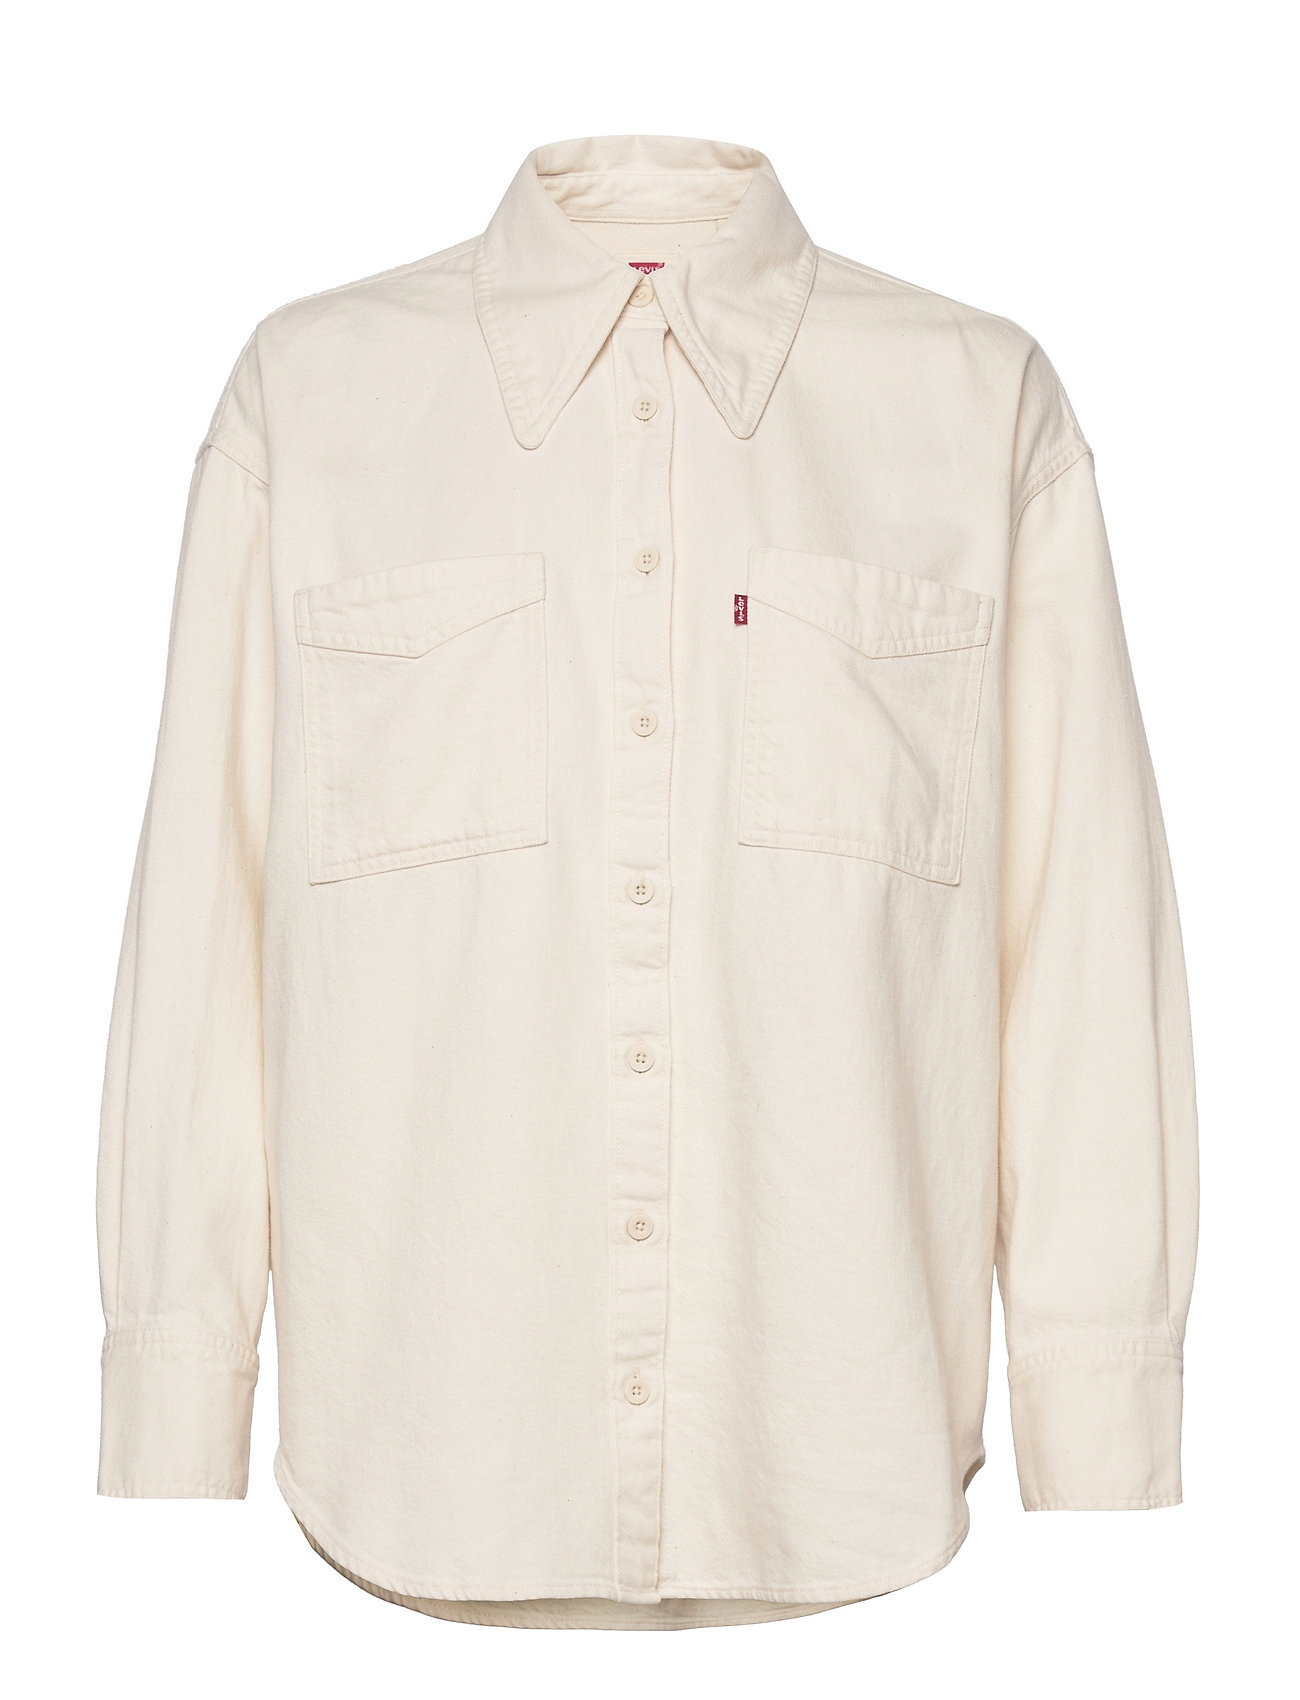 Levi's oxford shirt with small logo in white | ASOS